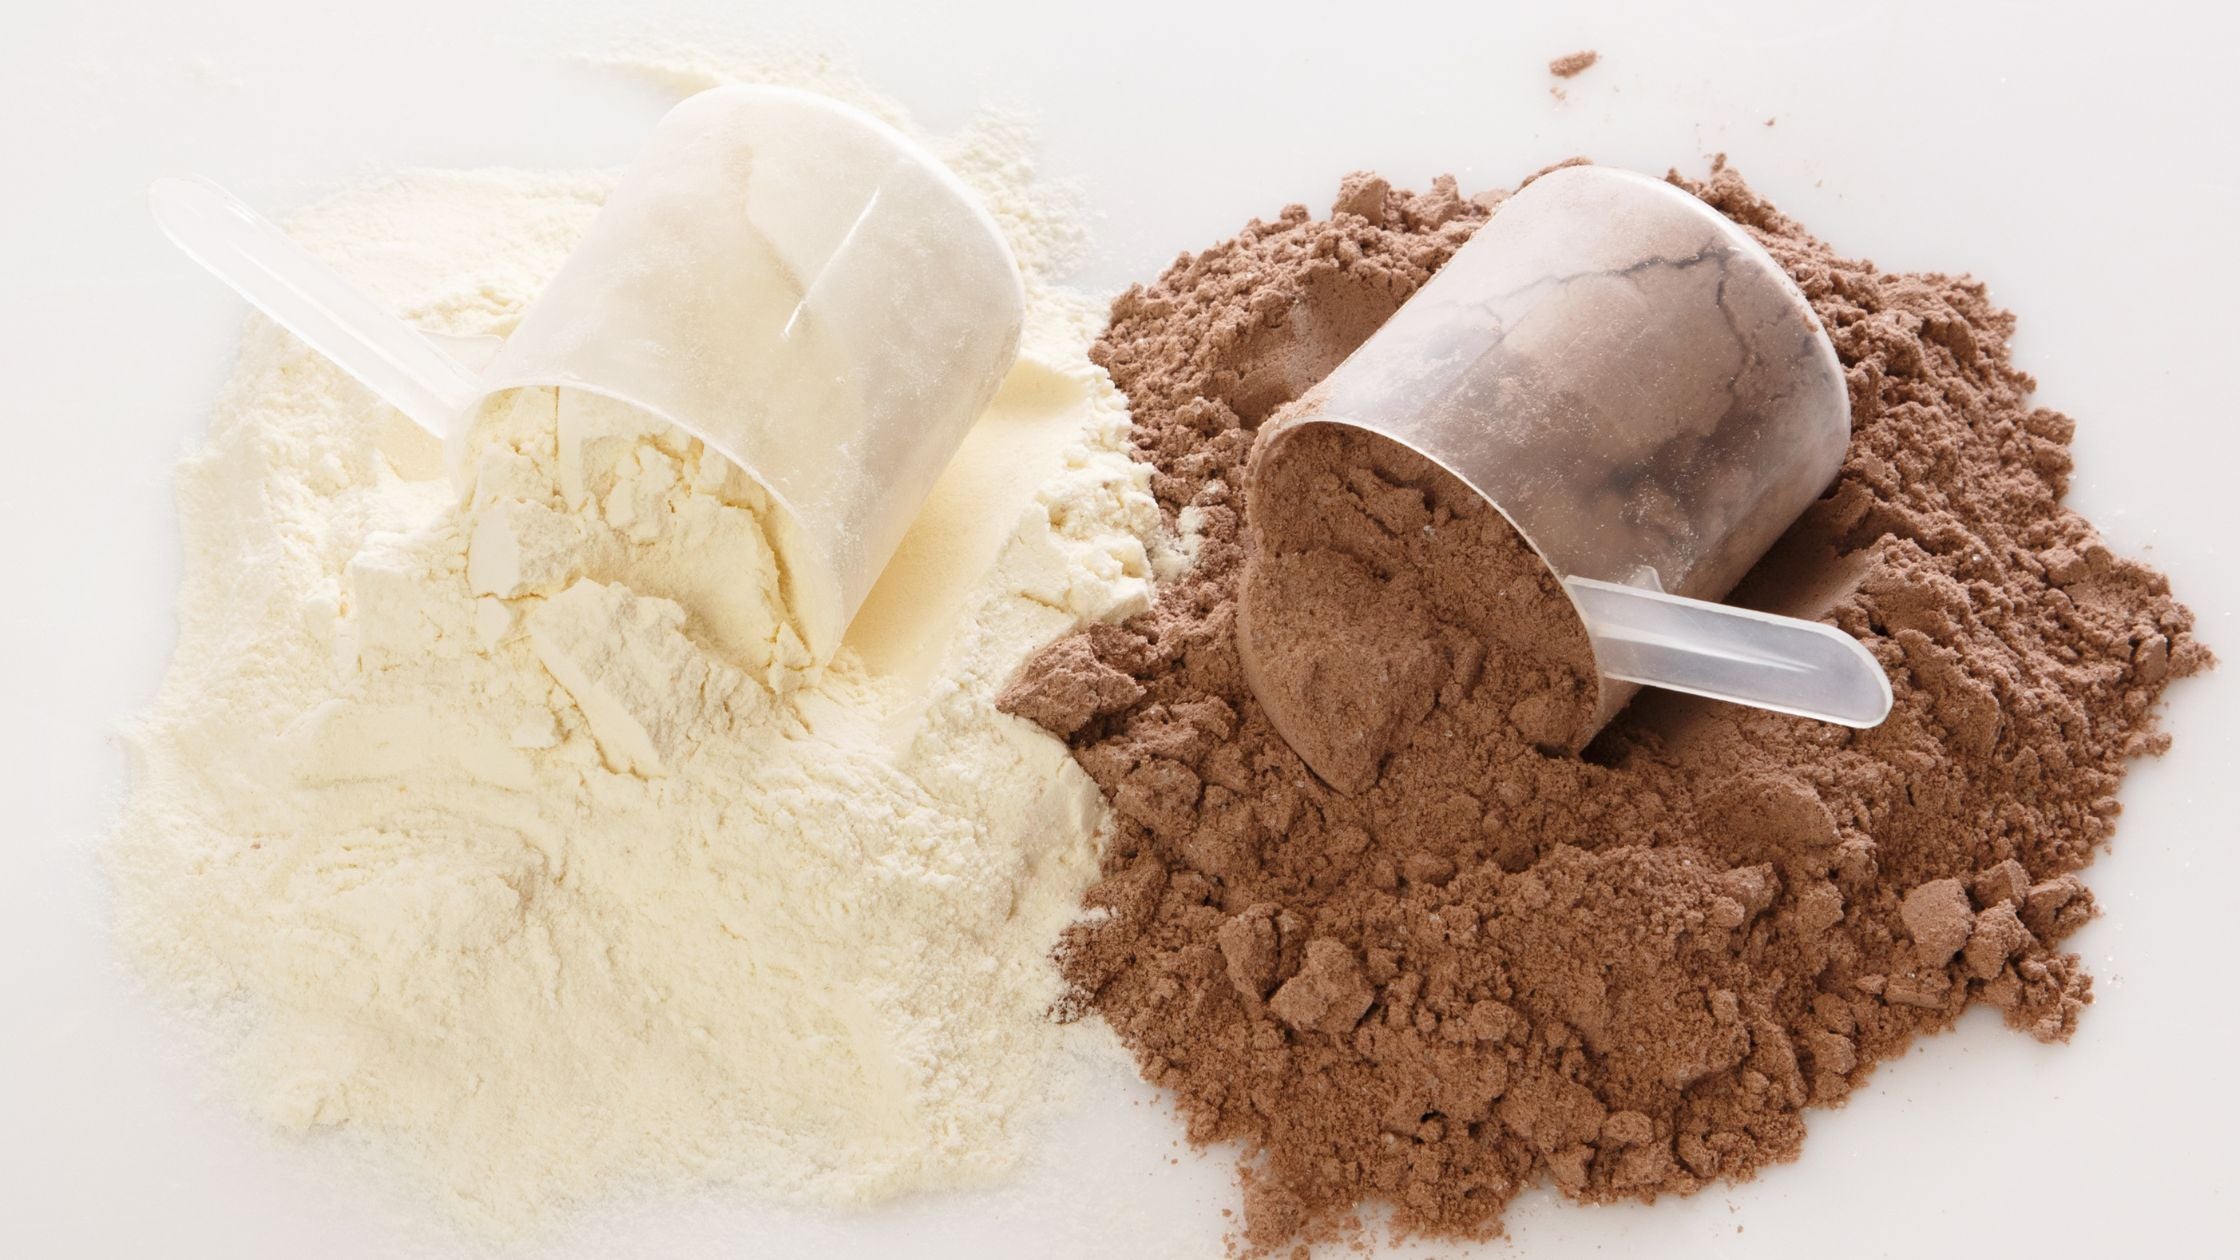 A word on plant-based protein powders